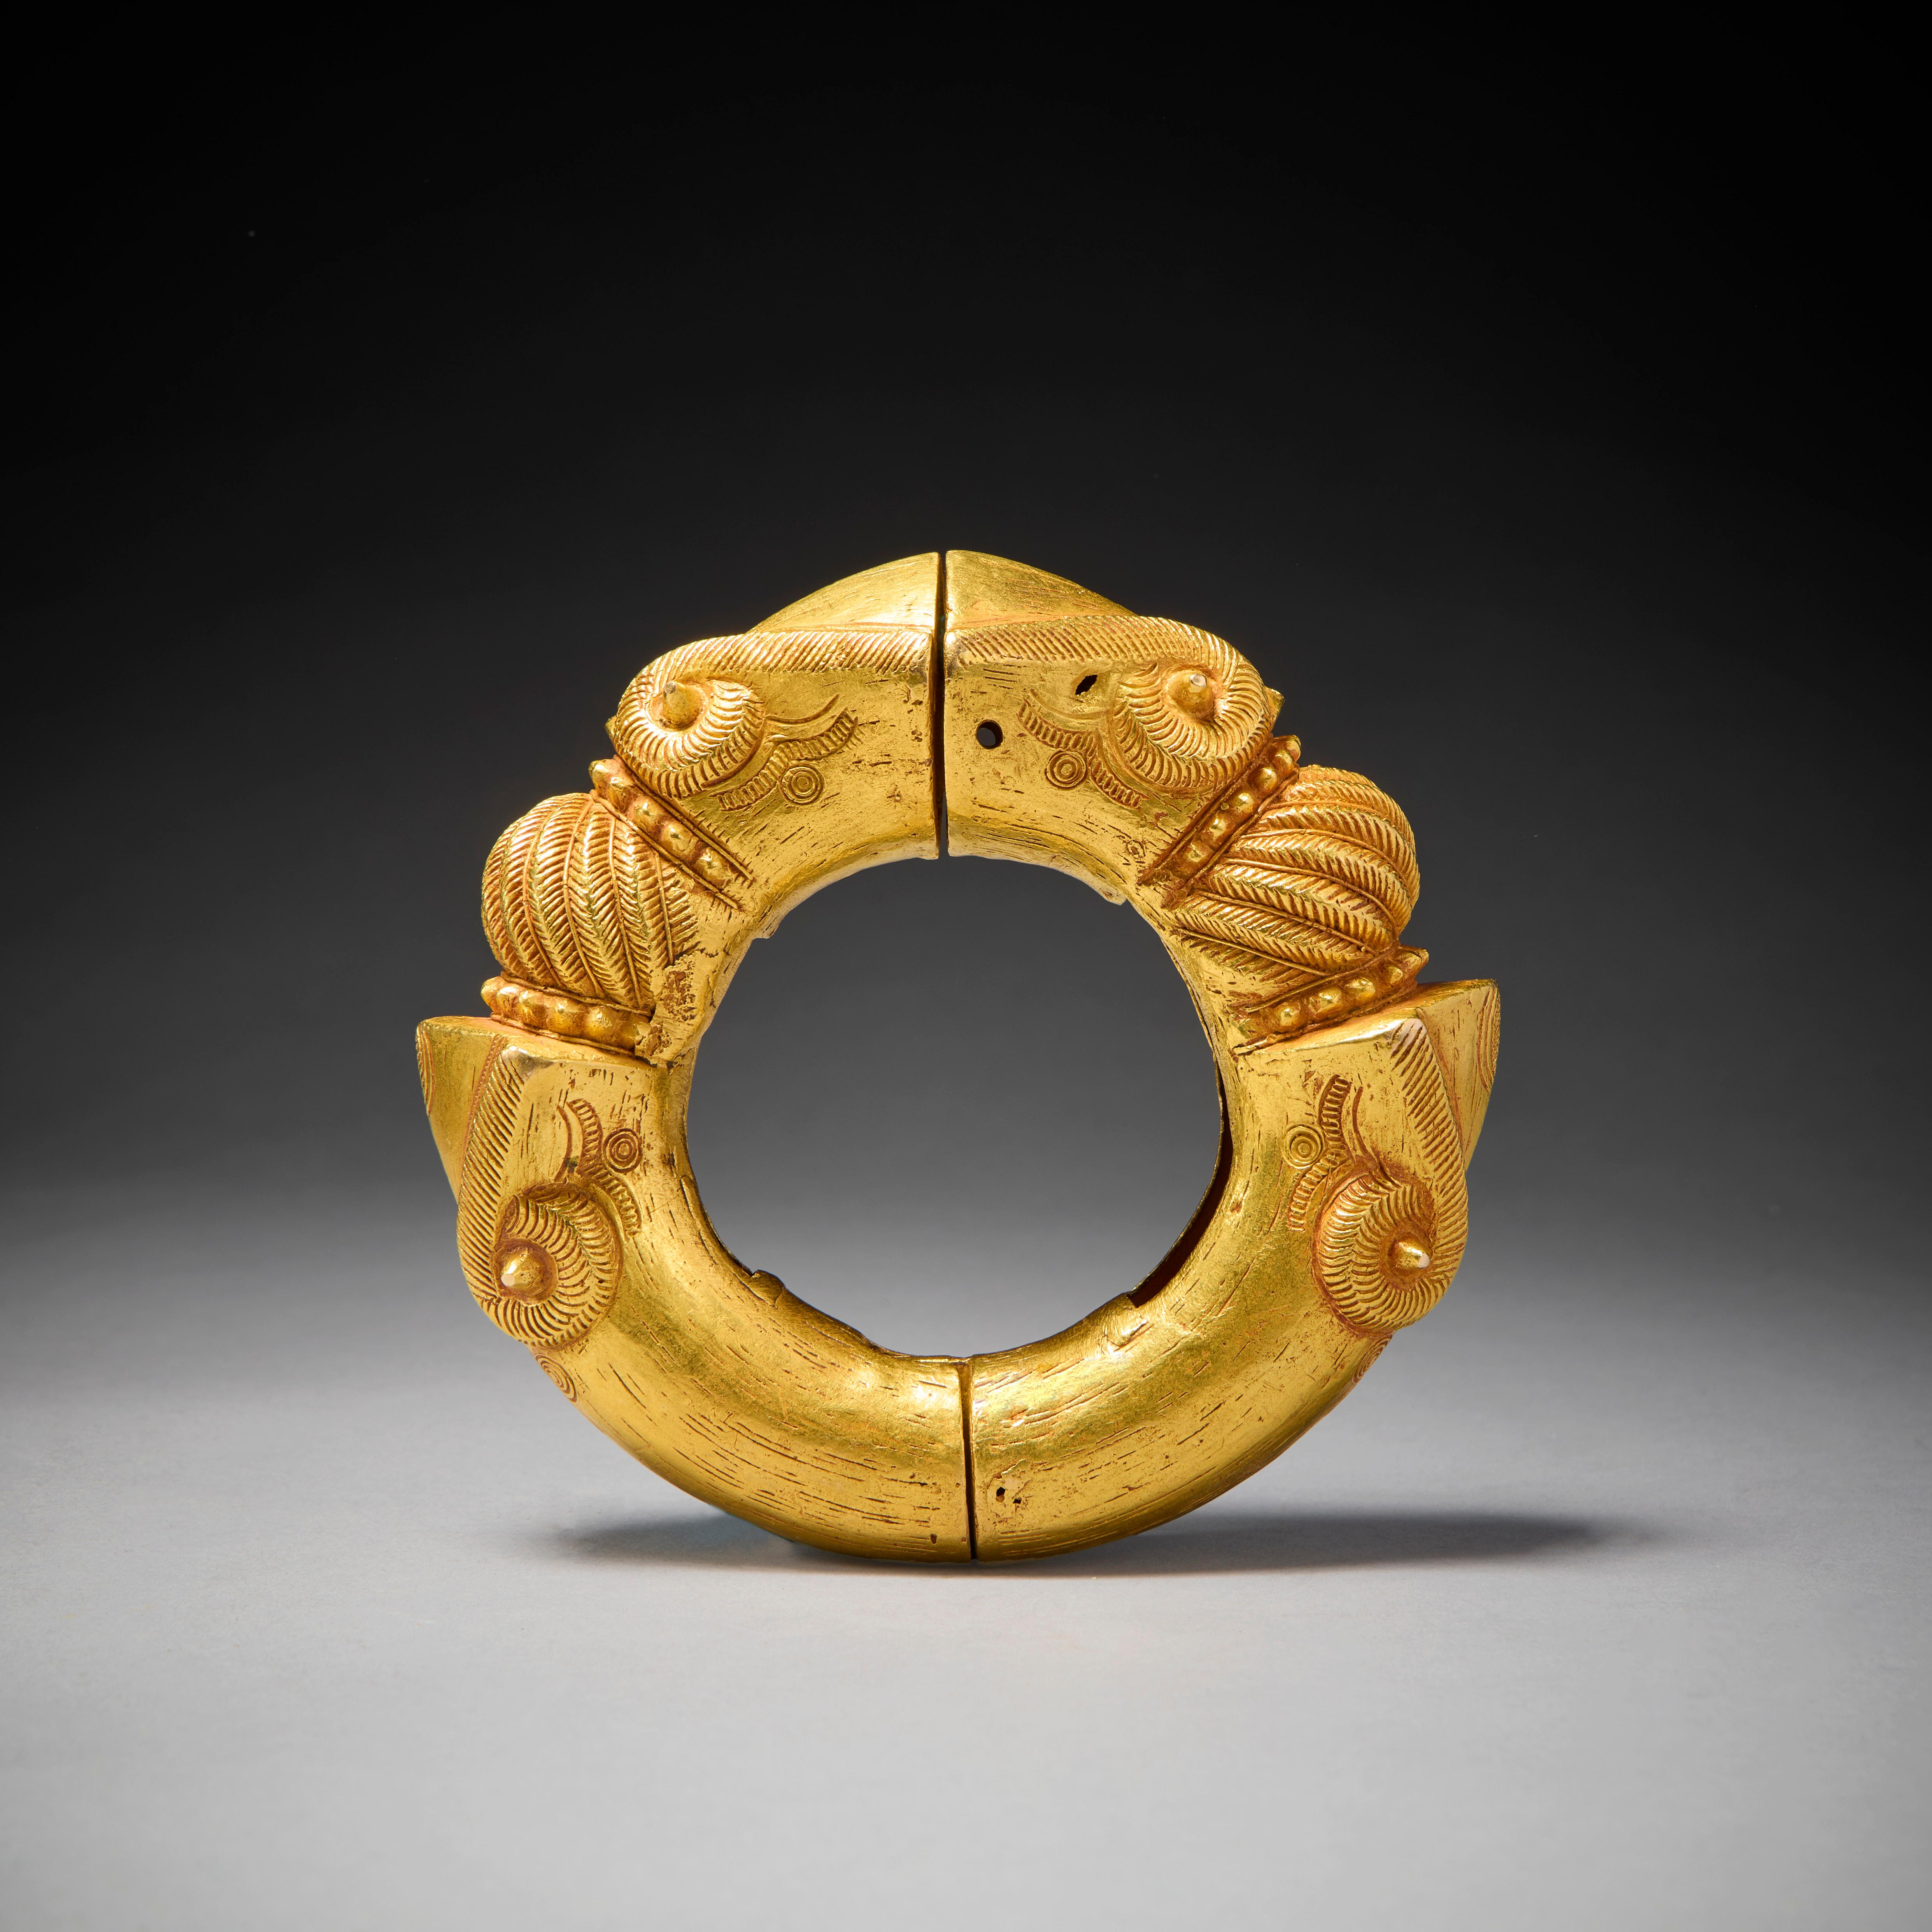 This magnificent gold bracelet was made for Ashanti royalty. 

The Ashanti Kingdom's wealth was significantly based on gold-mining and trading in gold, as well as agriculture. The kingdom continued to expand until under Asantehene Osei Bonsu